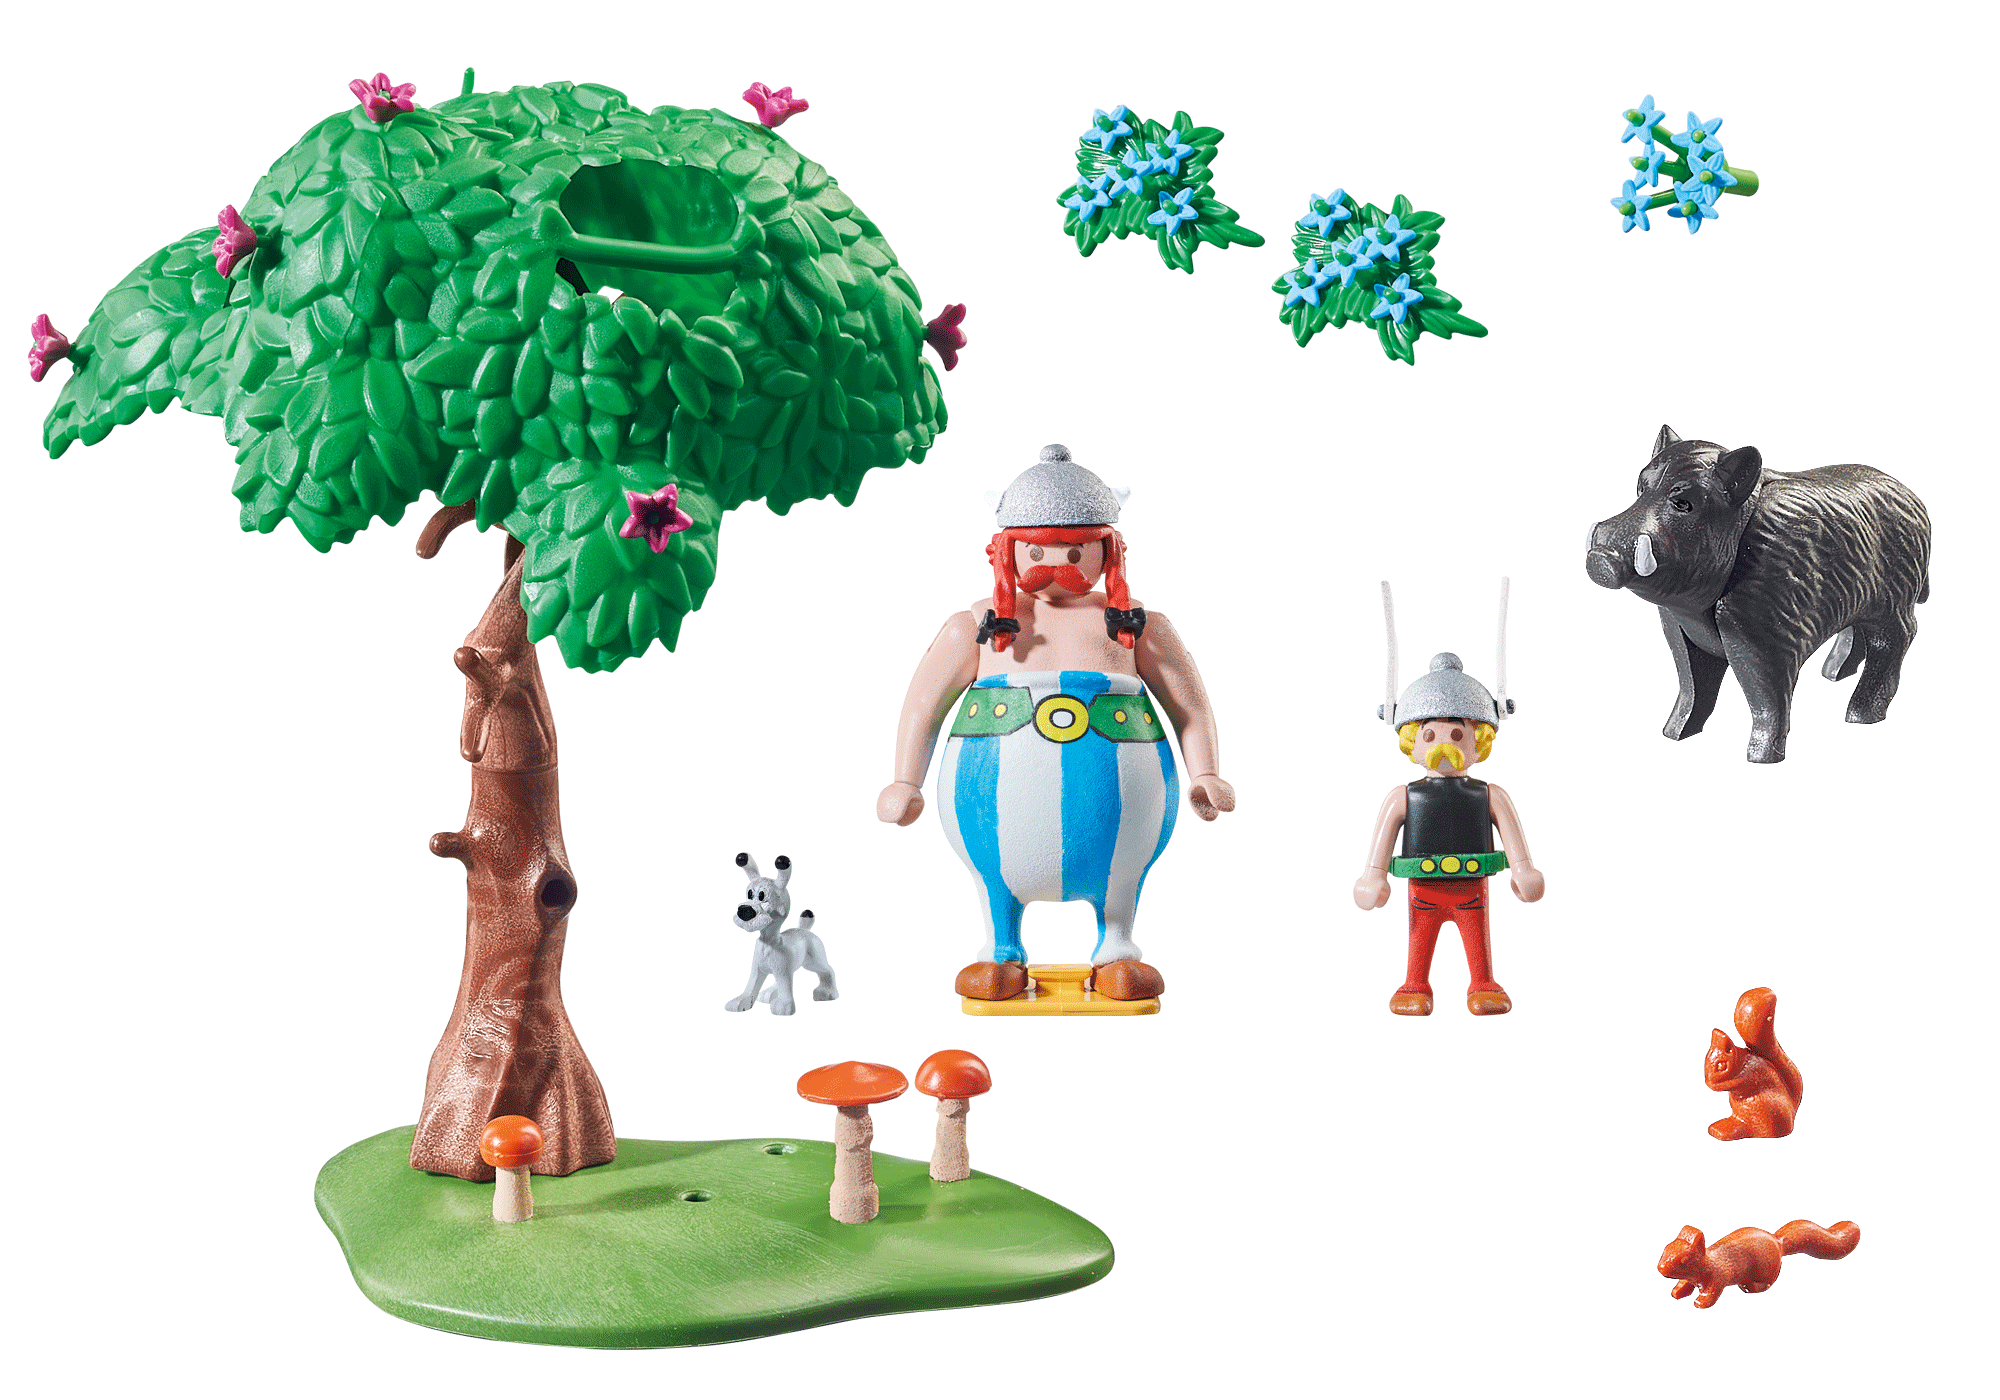 Playmobil to launch Asterix play-sets in 2022 - Mojo Nation